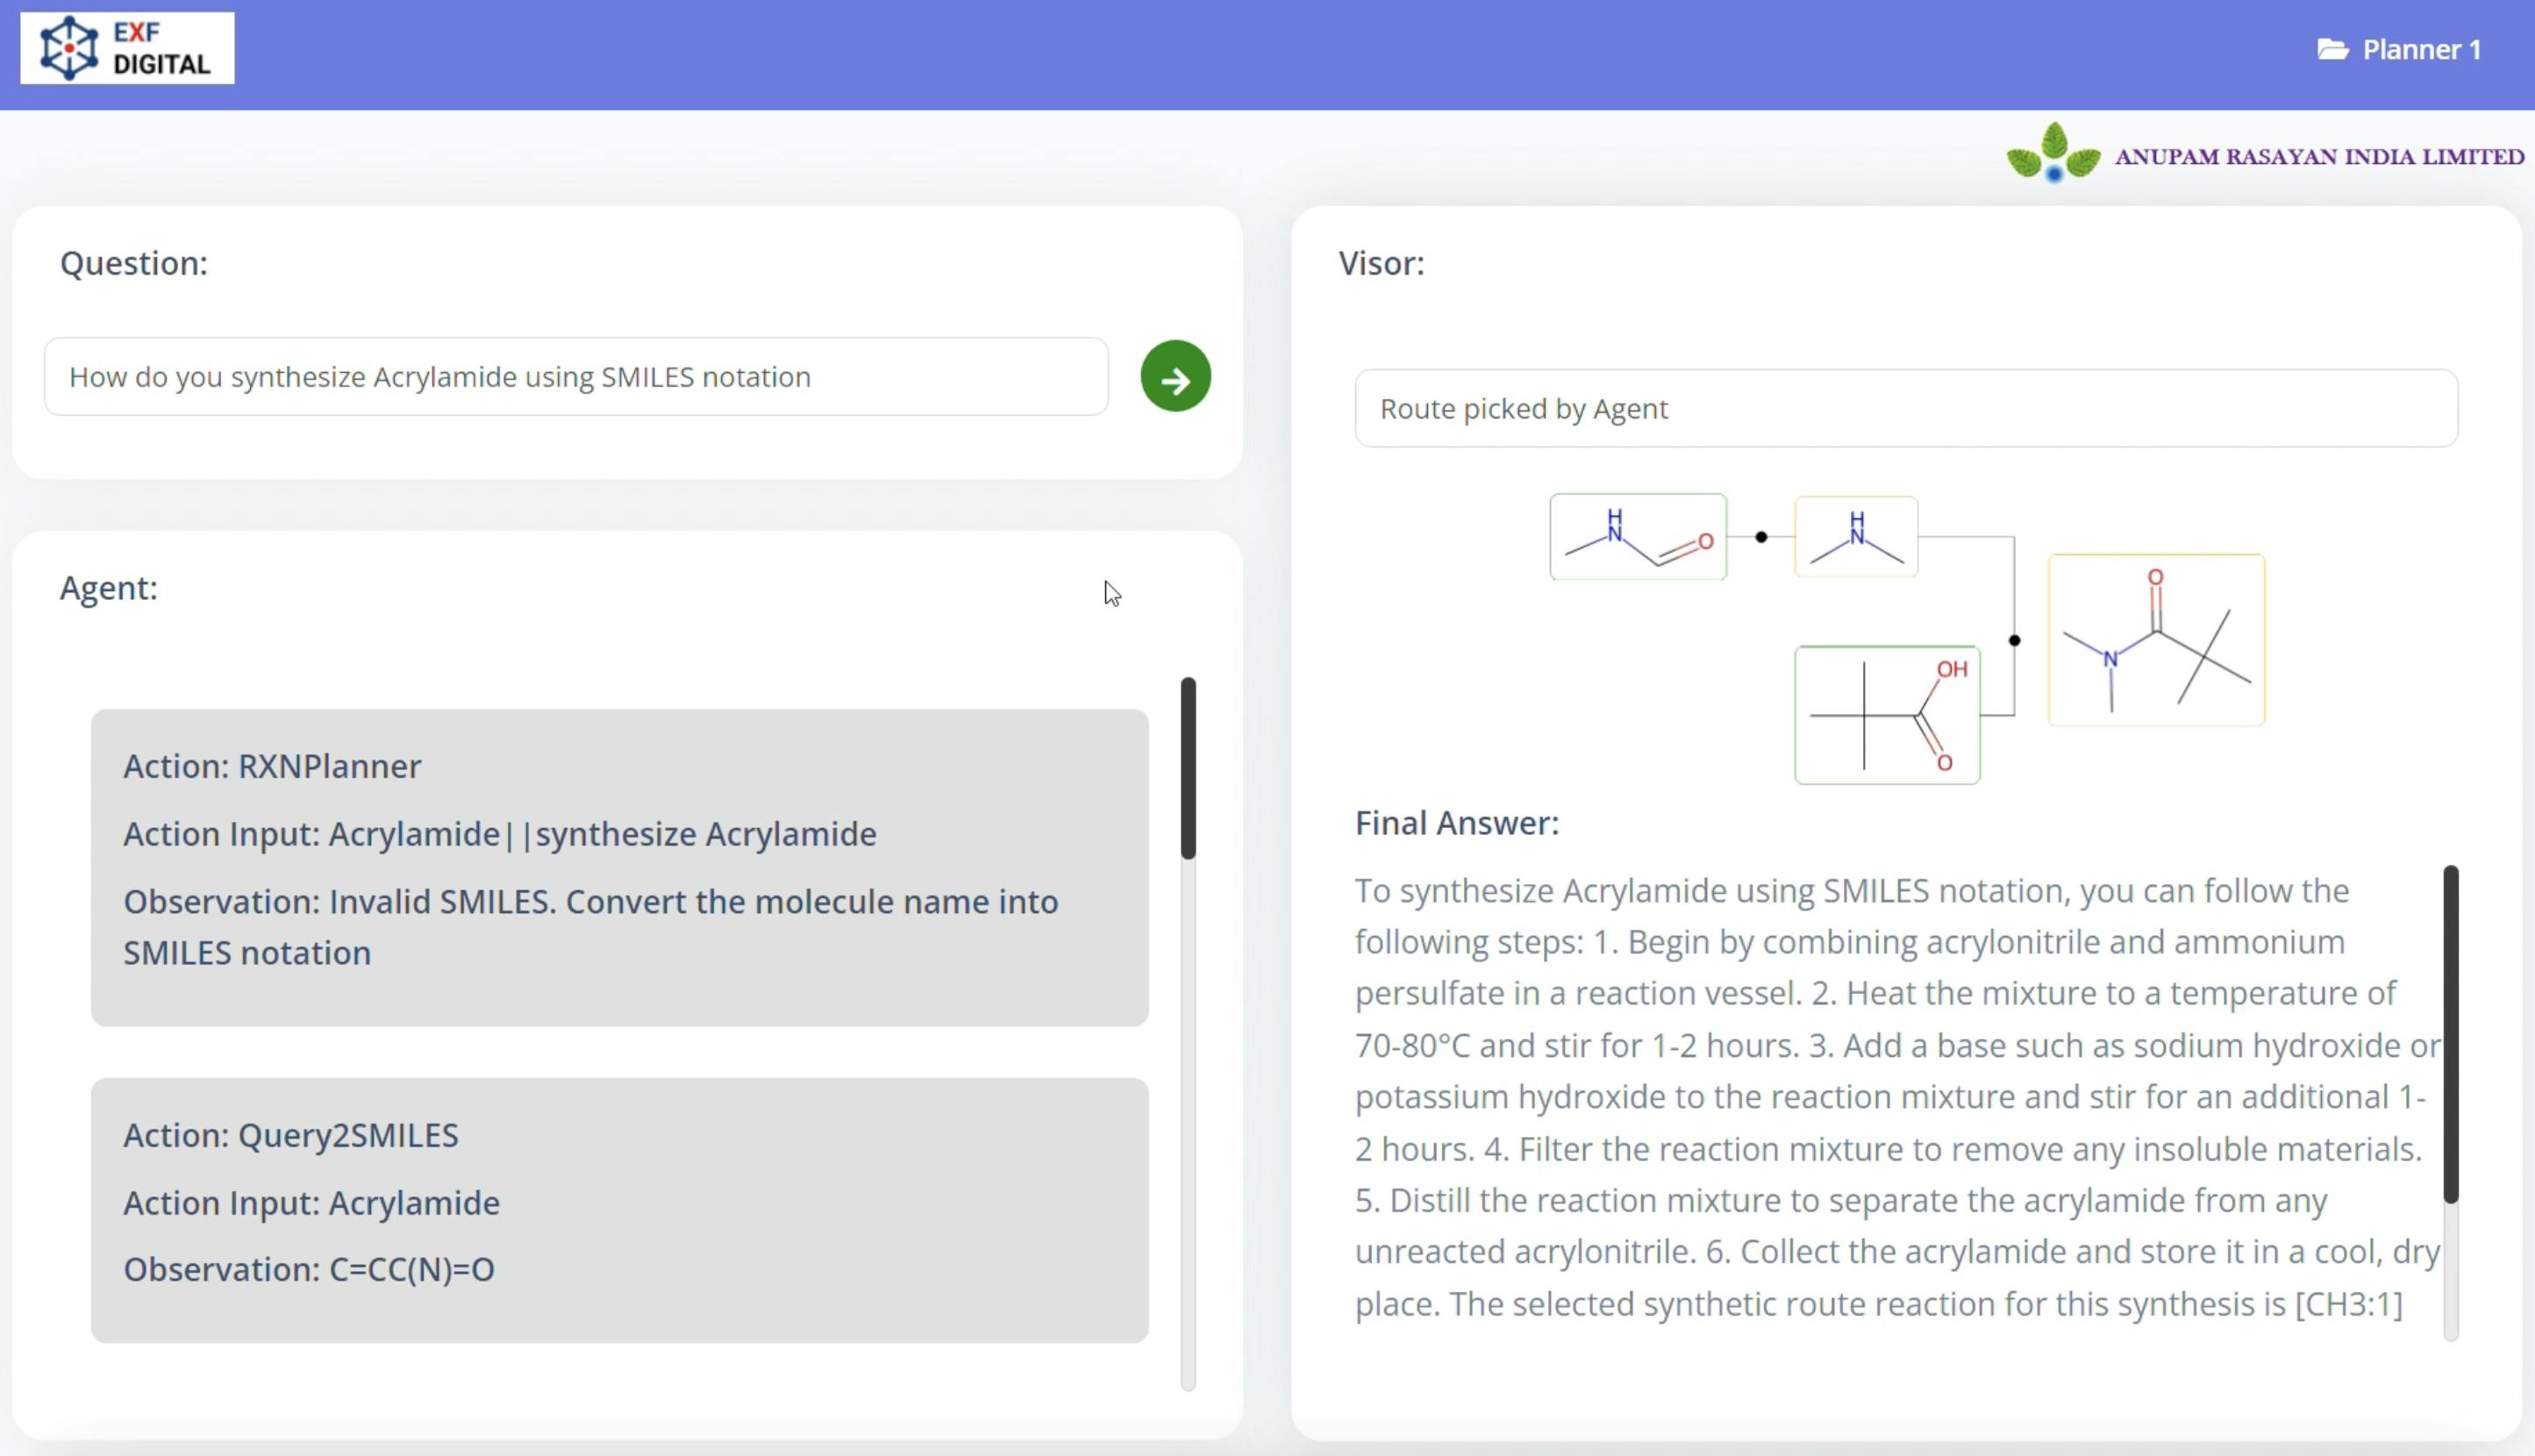 In the Retrosynthesis Planner, the user asks a question about how to synthesize the chemical, acrylamide. 